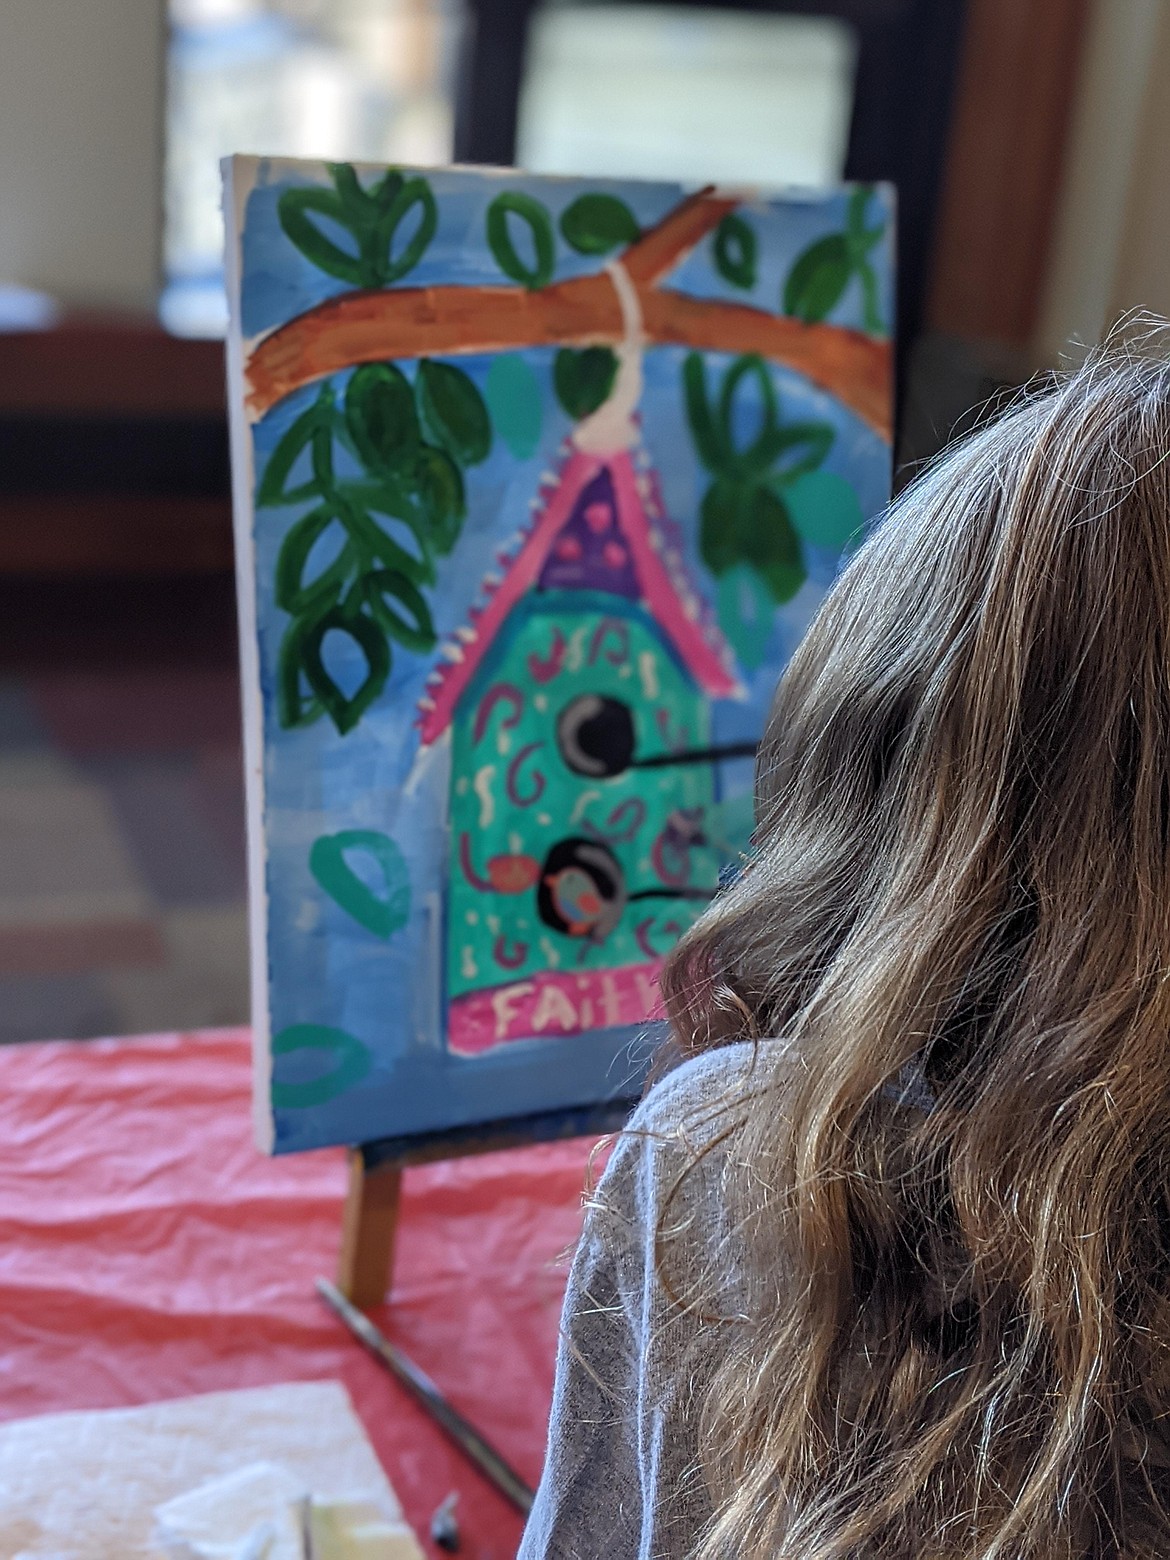 Art classes are among the many offerings at the Coeur d'Alene Kroc Center, which just celebrated its 12th anniversary.